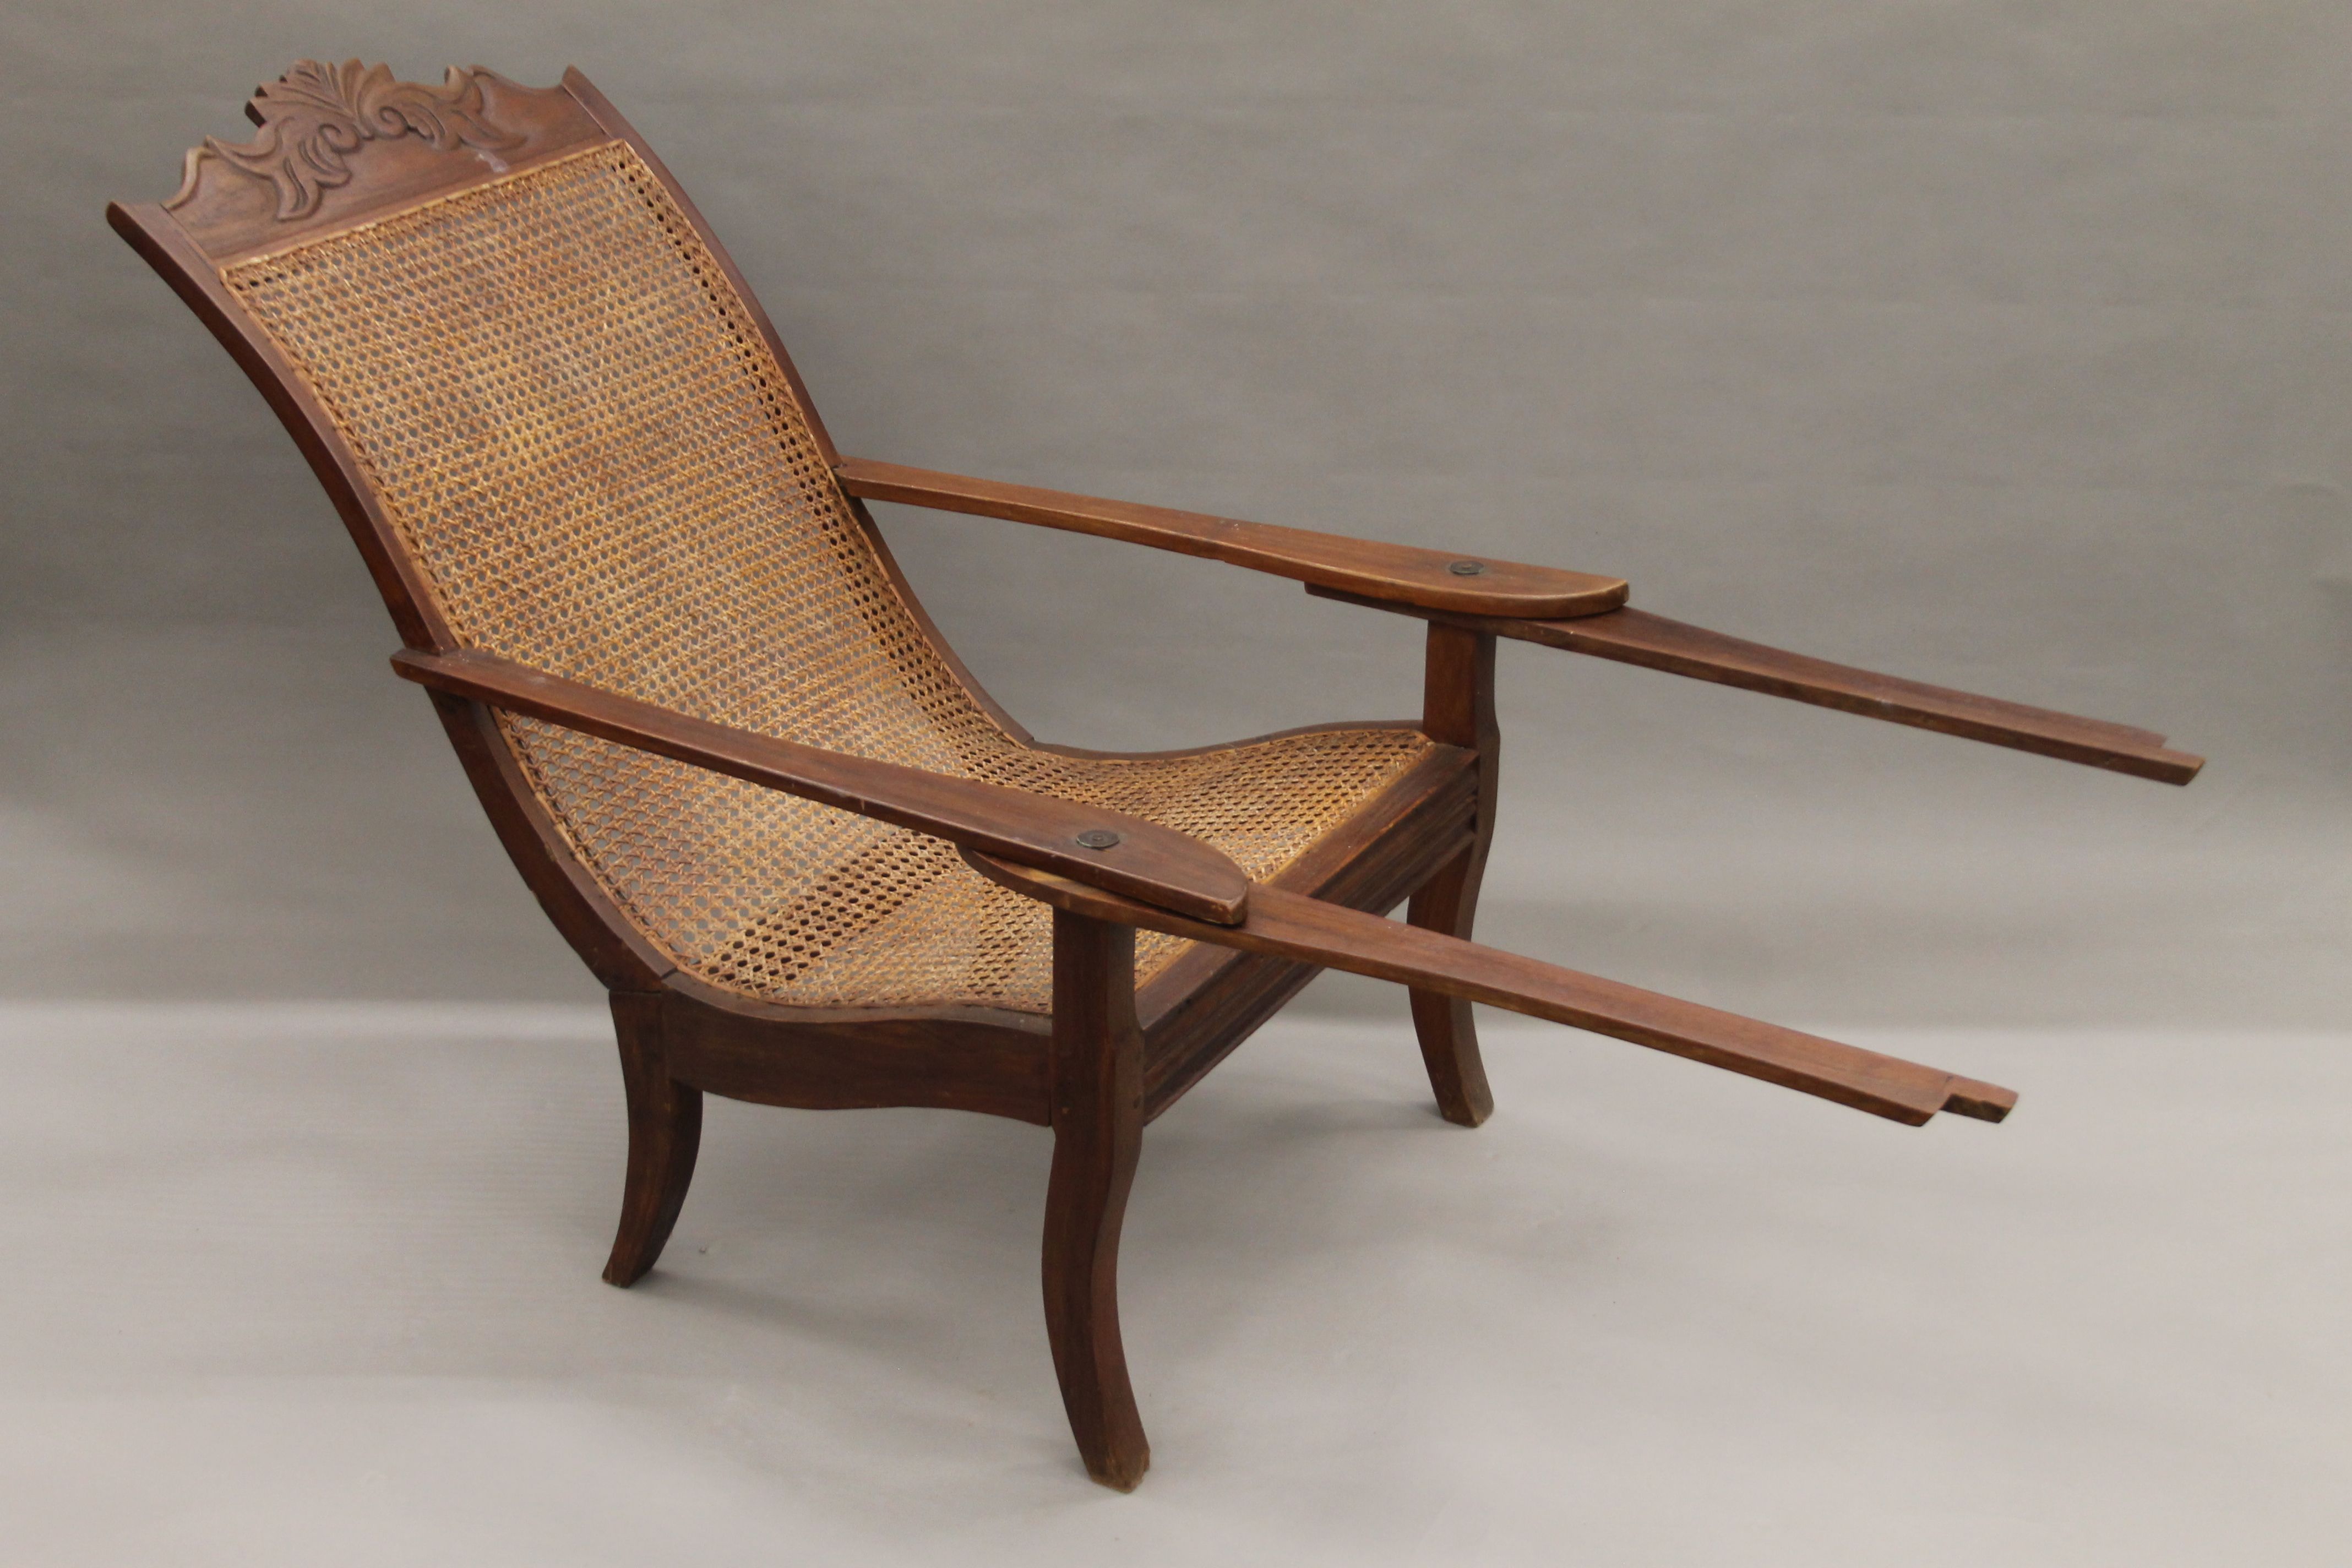 Two caned plantation chairs, each approximately 72 cm wide. - Image 7 of 11